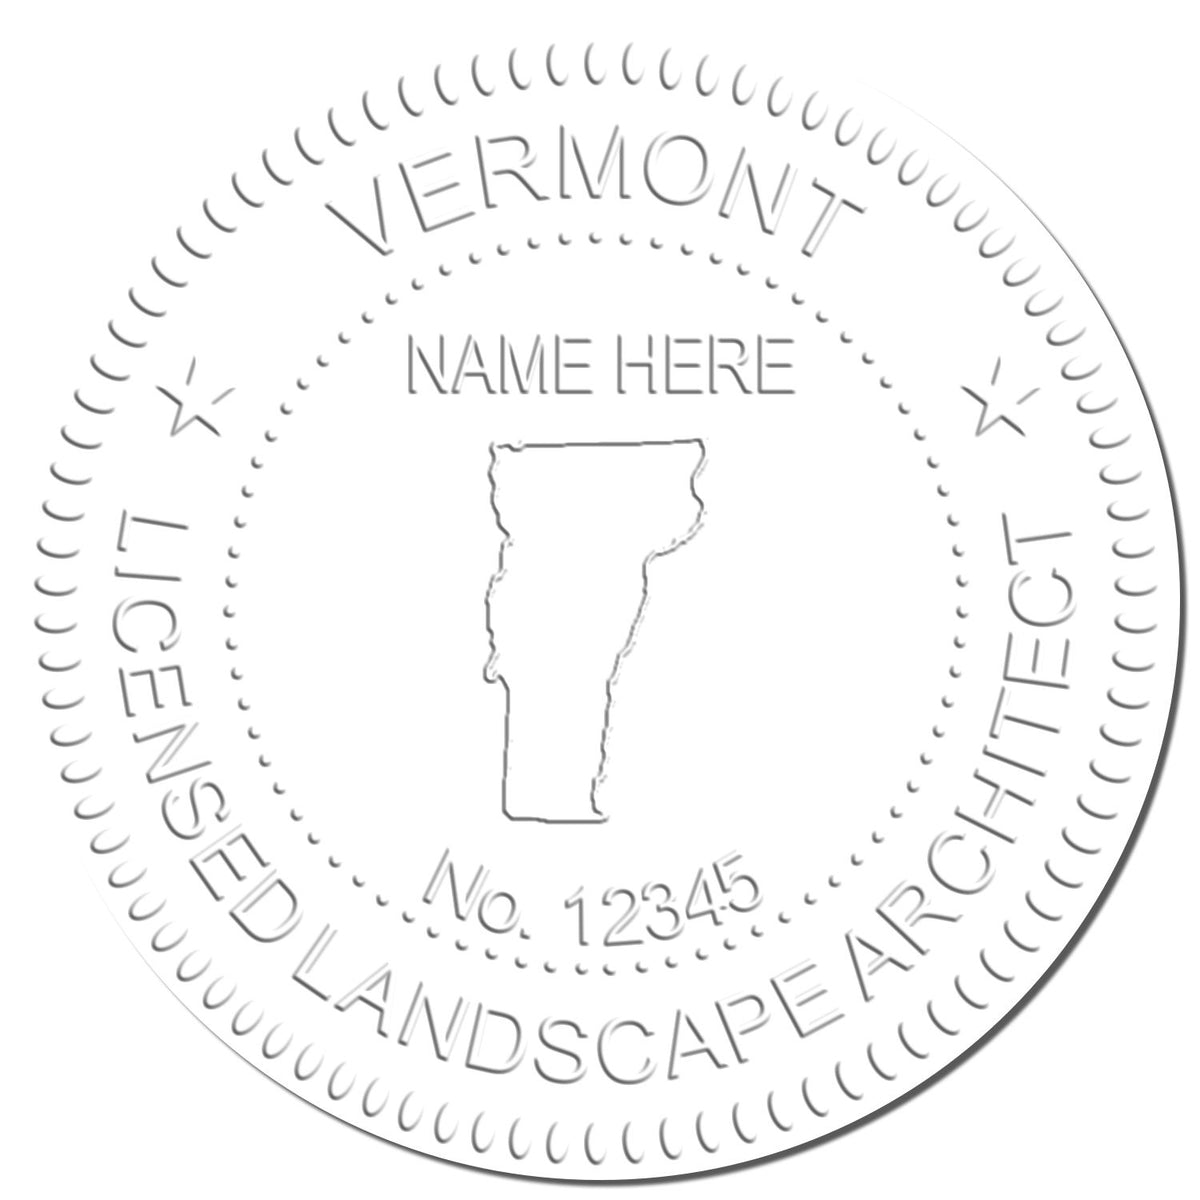 This paper is stamped with a sample imprint of the Hybrid Vermont Landscape Architect Seal, signifying its quality and reliability.